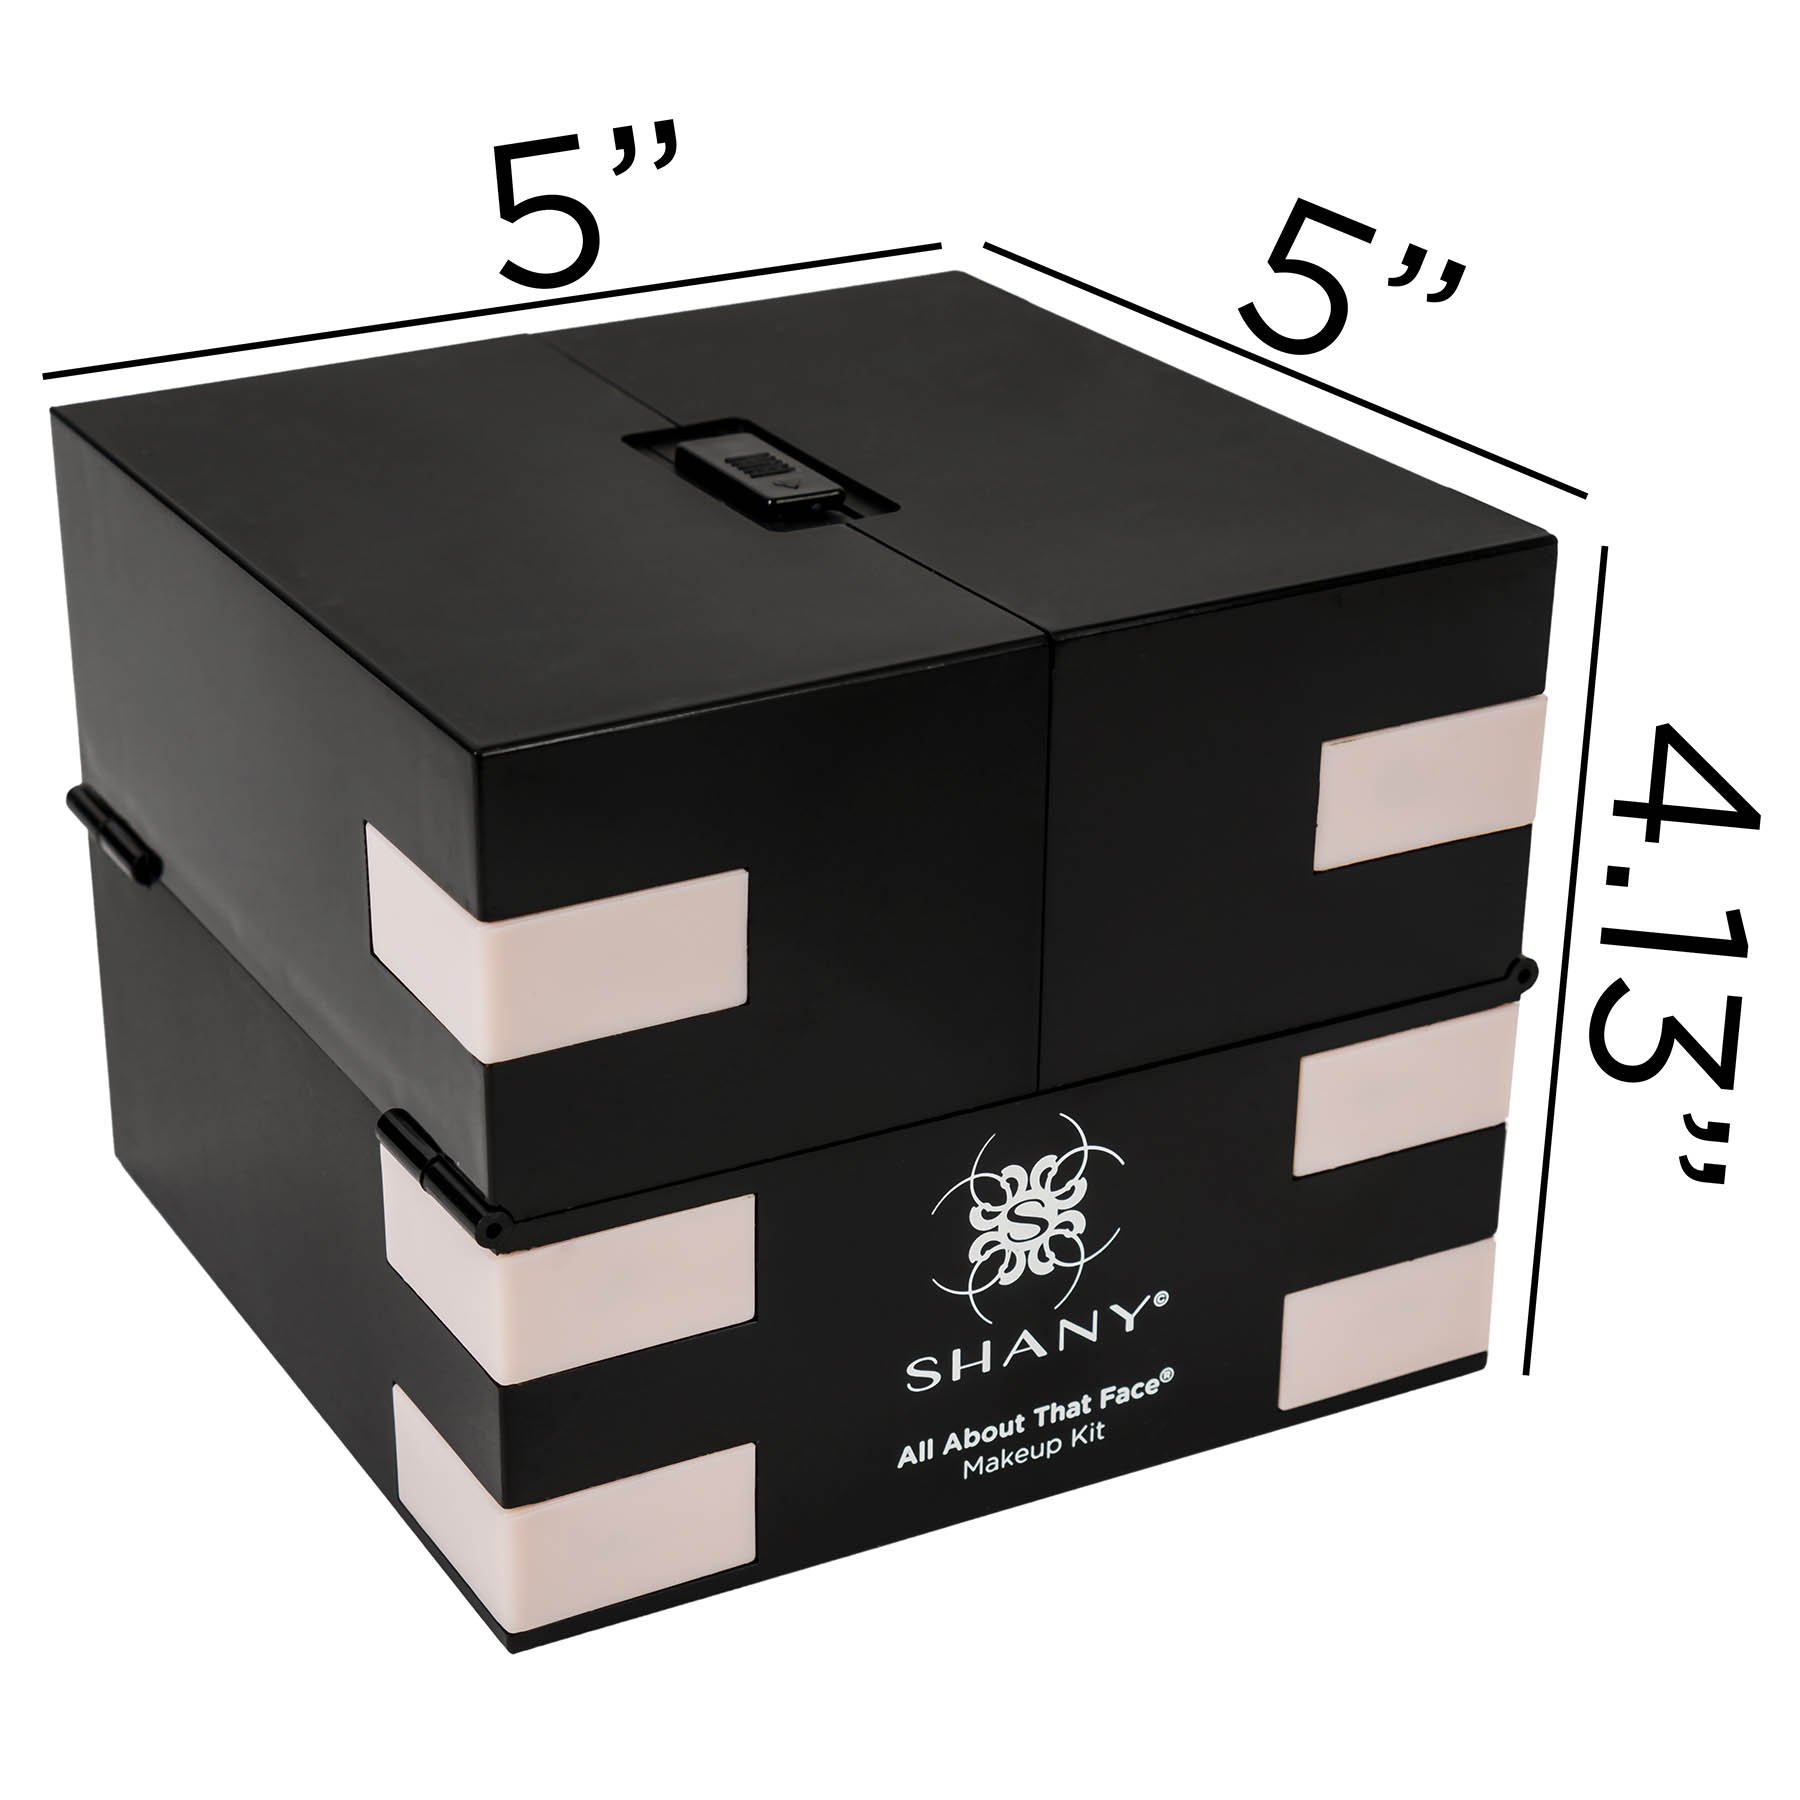 SHANY 'All About That Face' Makeup Kit - All in one Beginner Makeup Set - Eye Shadows, Lip Colors, Face Makeup, Cosmetics applicators & More.